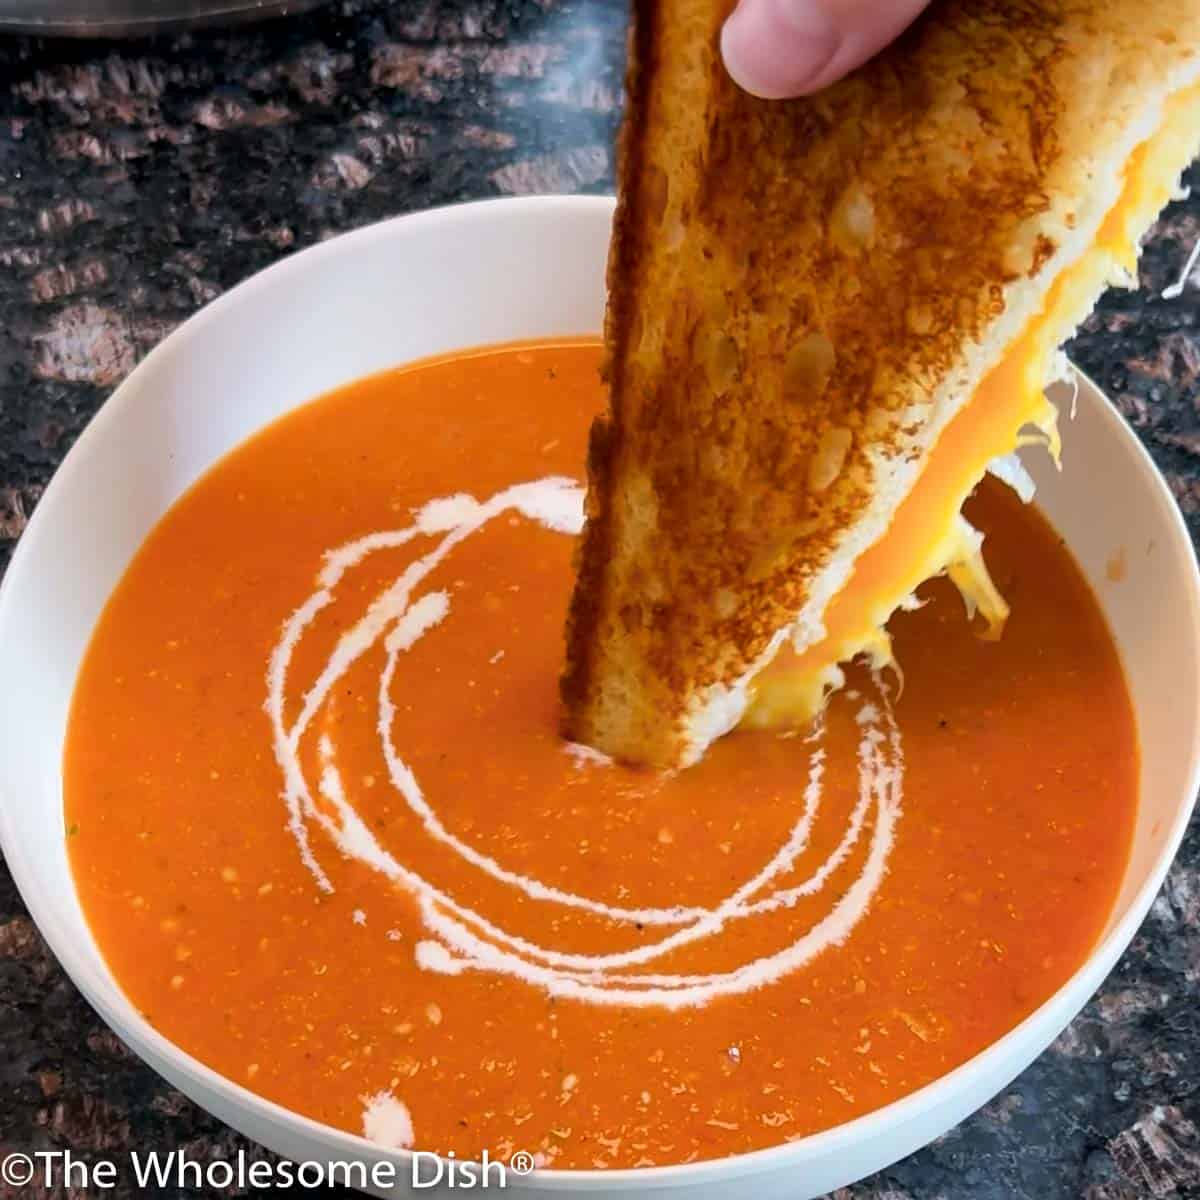 Dipping a grilled cheese into a bowl of tomato soup.